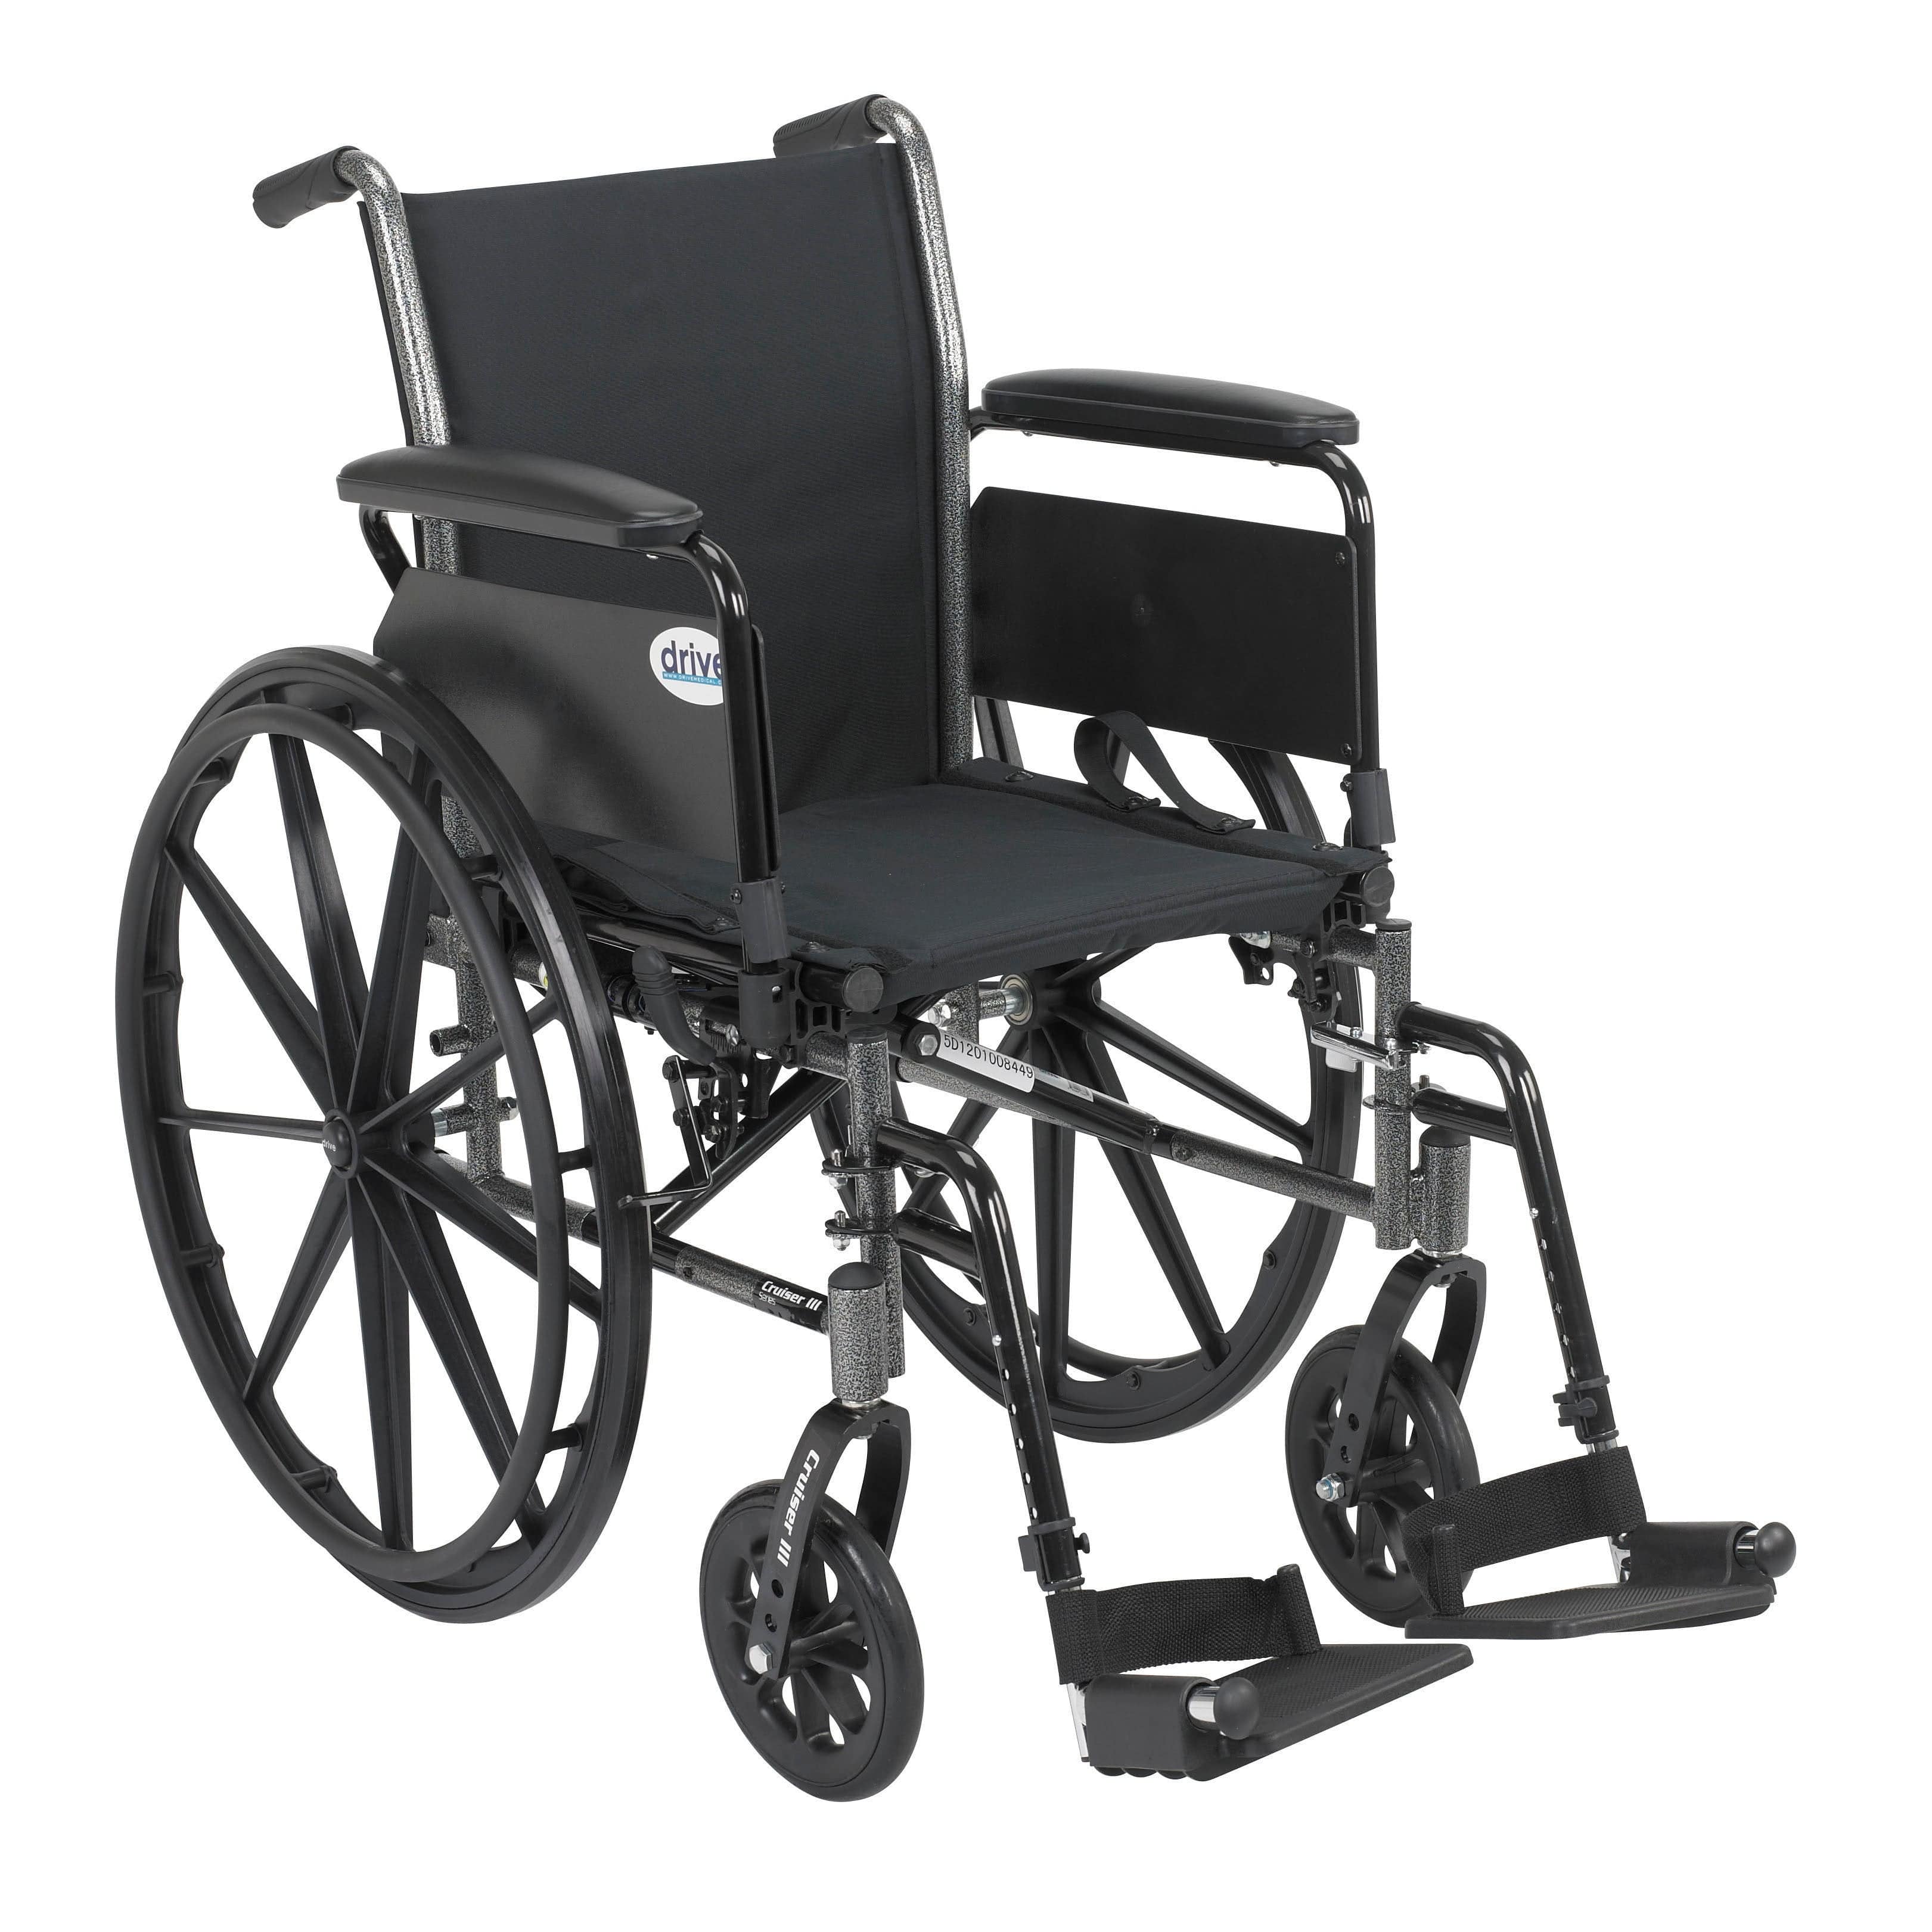 Drive Medical Wheelchairs Flip Back Removable Full Arms and Swing away Footrests / 18" Seat Drive Medical Cruiser III Light Weight Wheelchair with Flip Back Removable Arms